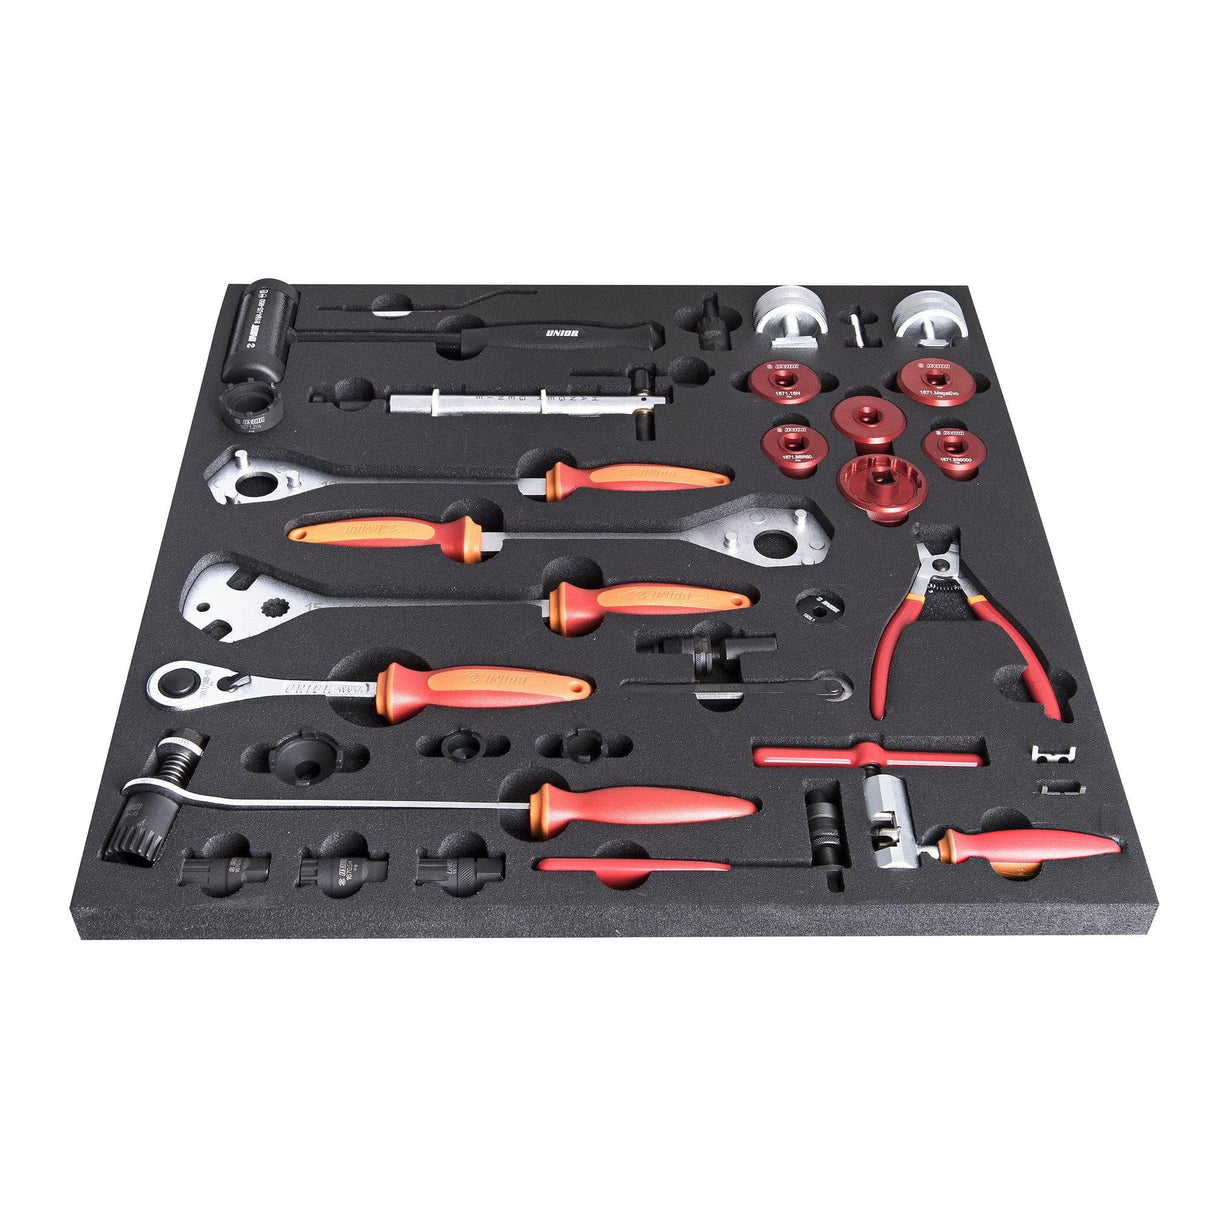 Unior Set Of Tools In Tray 2 For 2600A And 2600C-Drivetrain Tools: Red